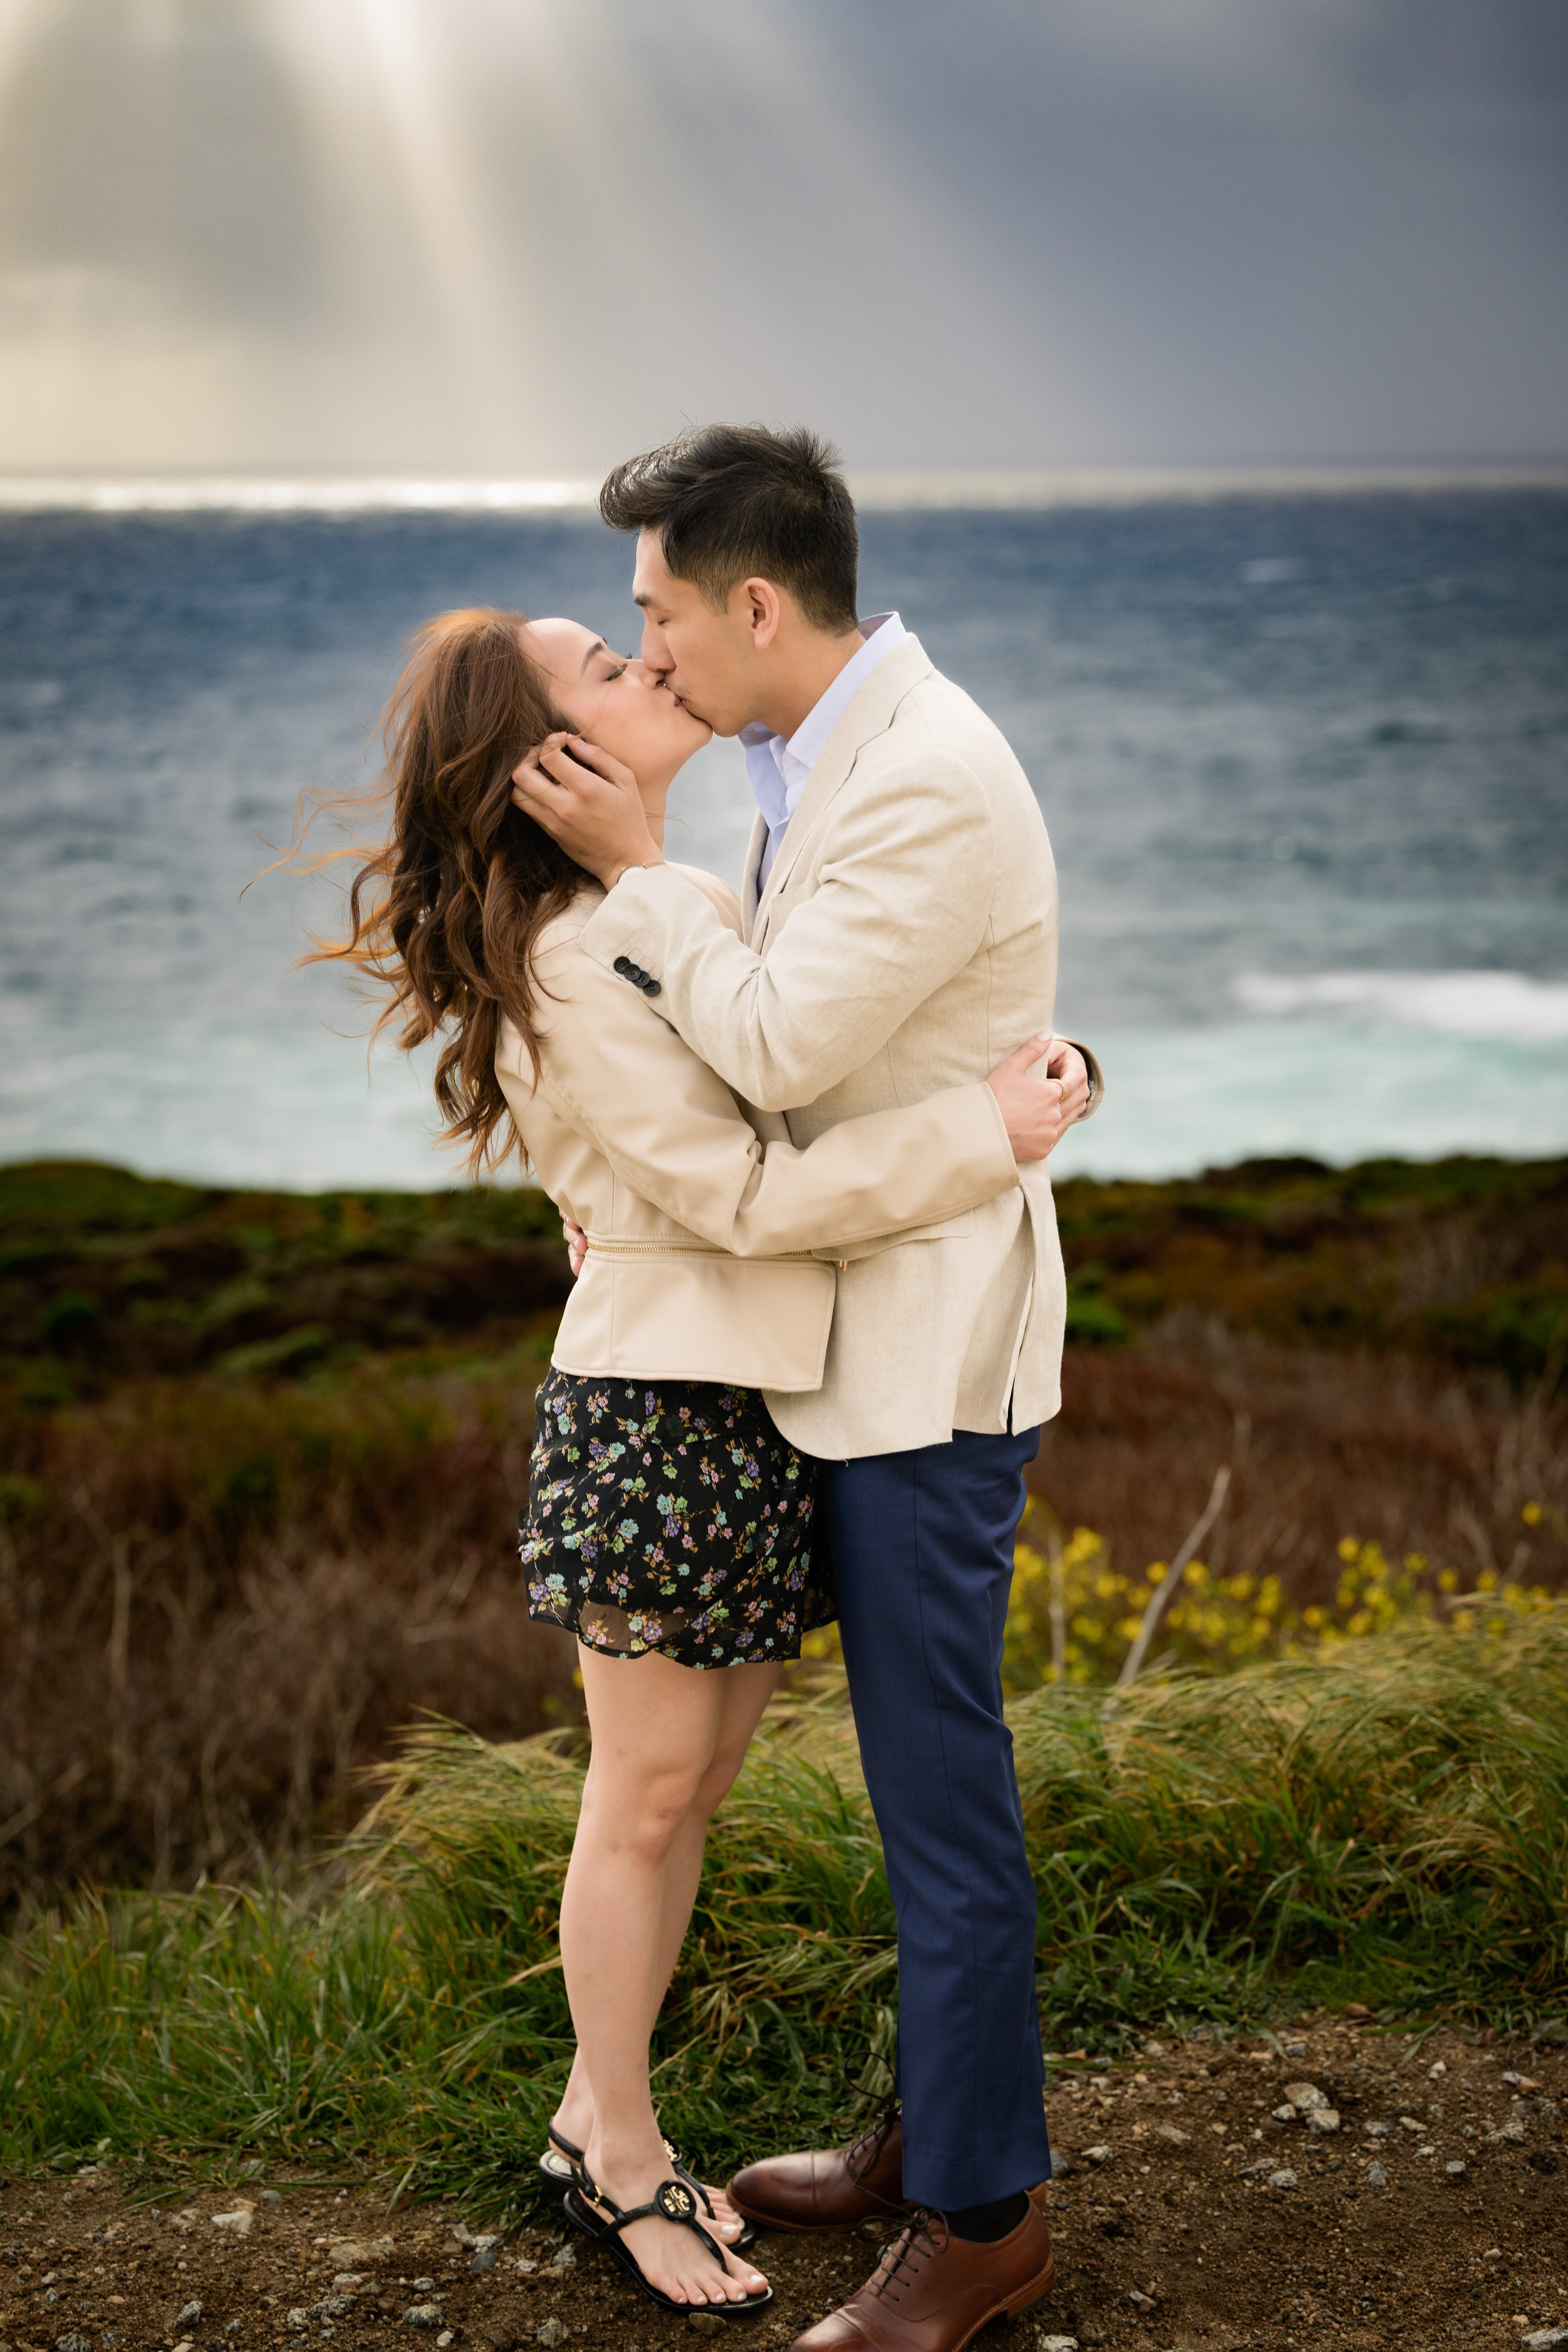 Z9A_4616_Lucy_and_Minh_Garrapata_Big_Sur_Carmel_Engagement_Photography.jpg